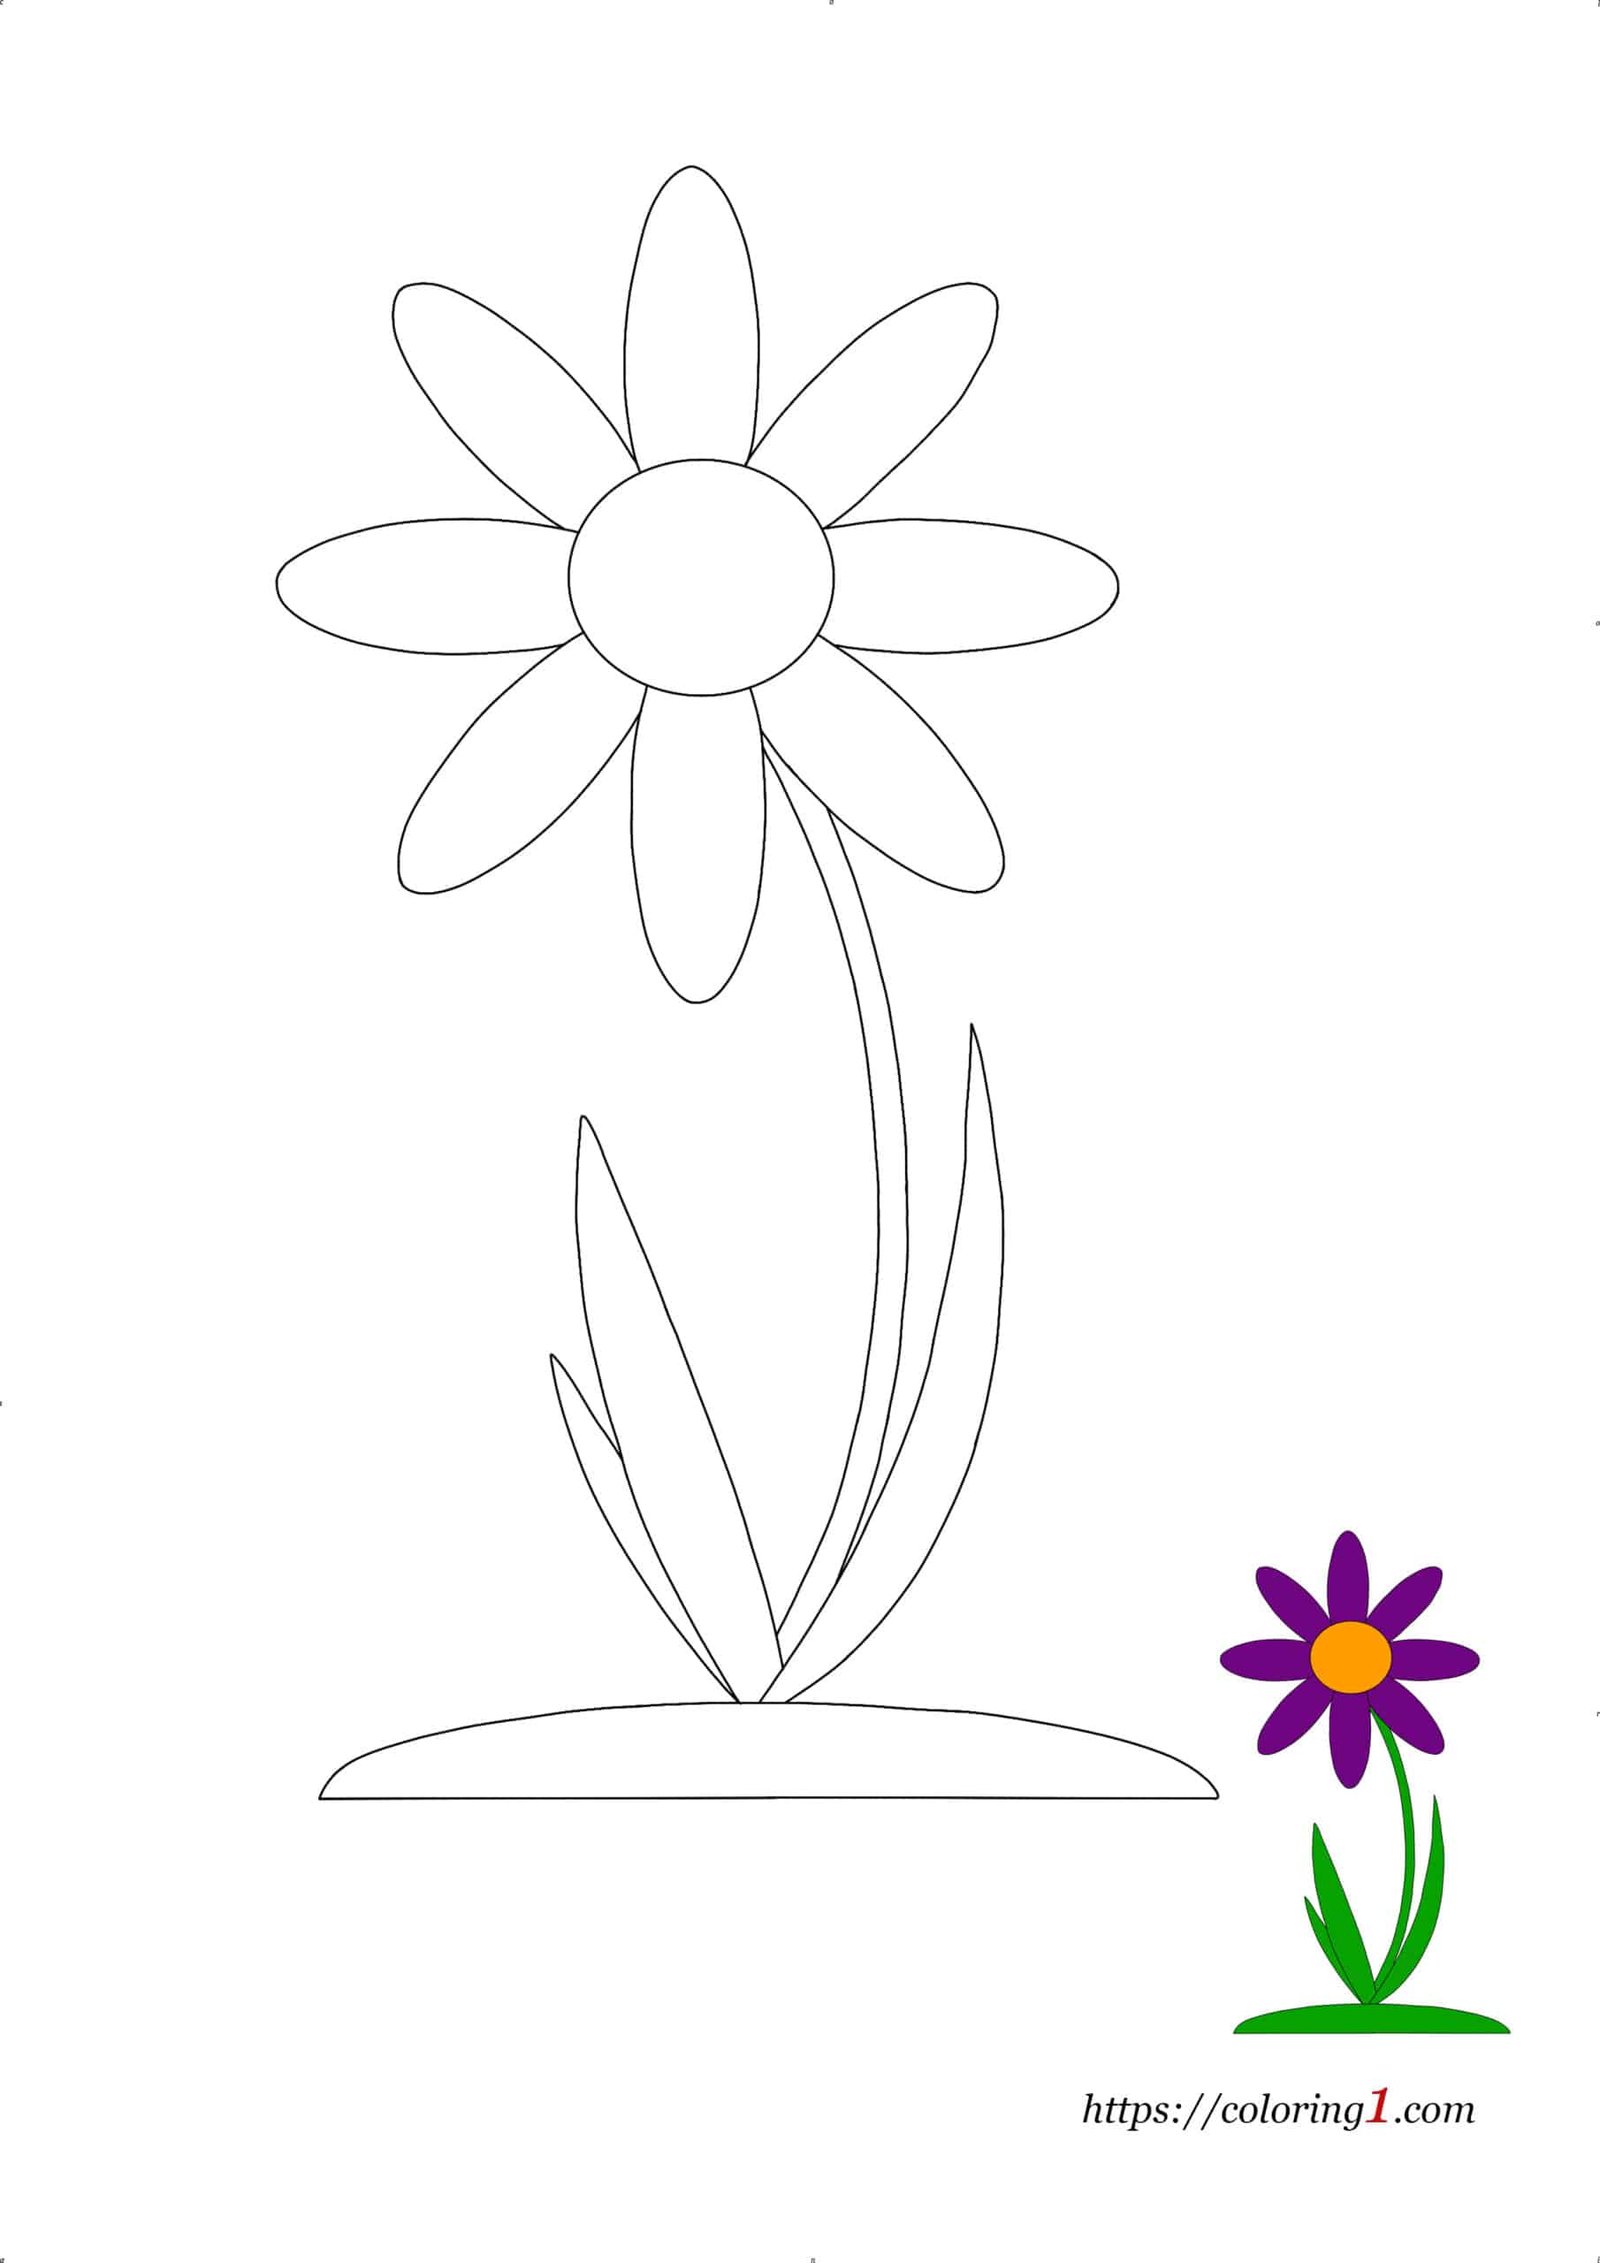 Single Flower easy online coloring page to print